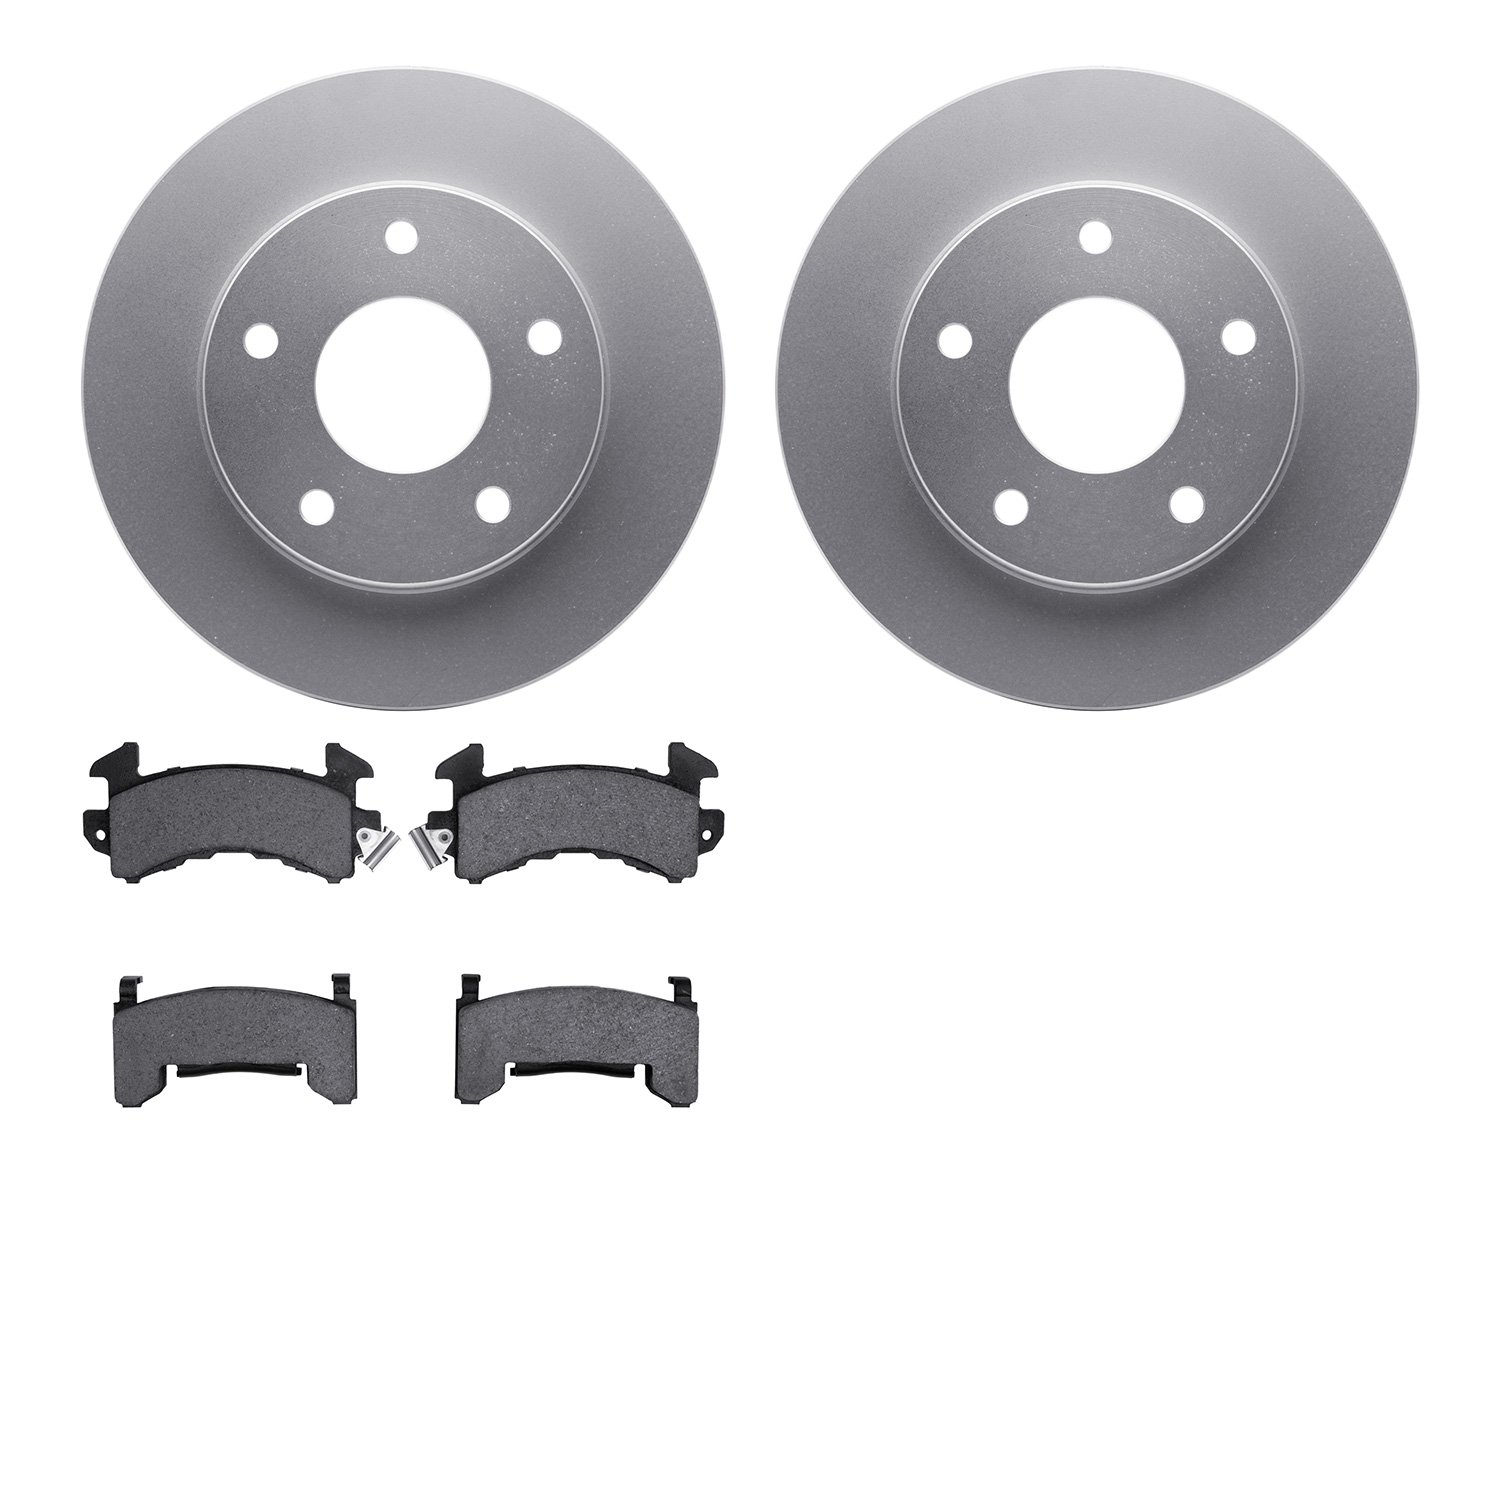 4402-48002 Geospec Brake Rotors with Ultimate-Duty Brake Pads Kit, 1979-1998 GM, Position: Front